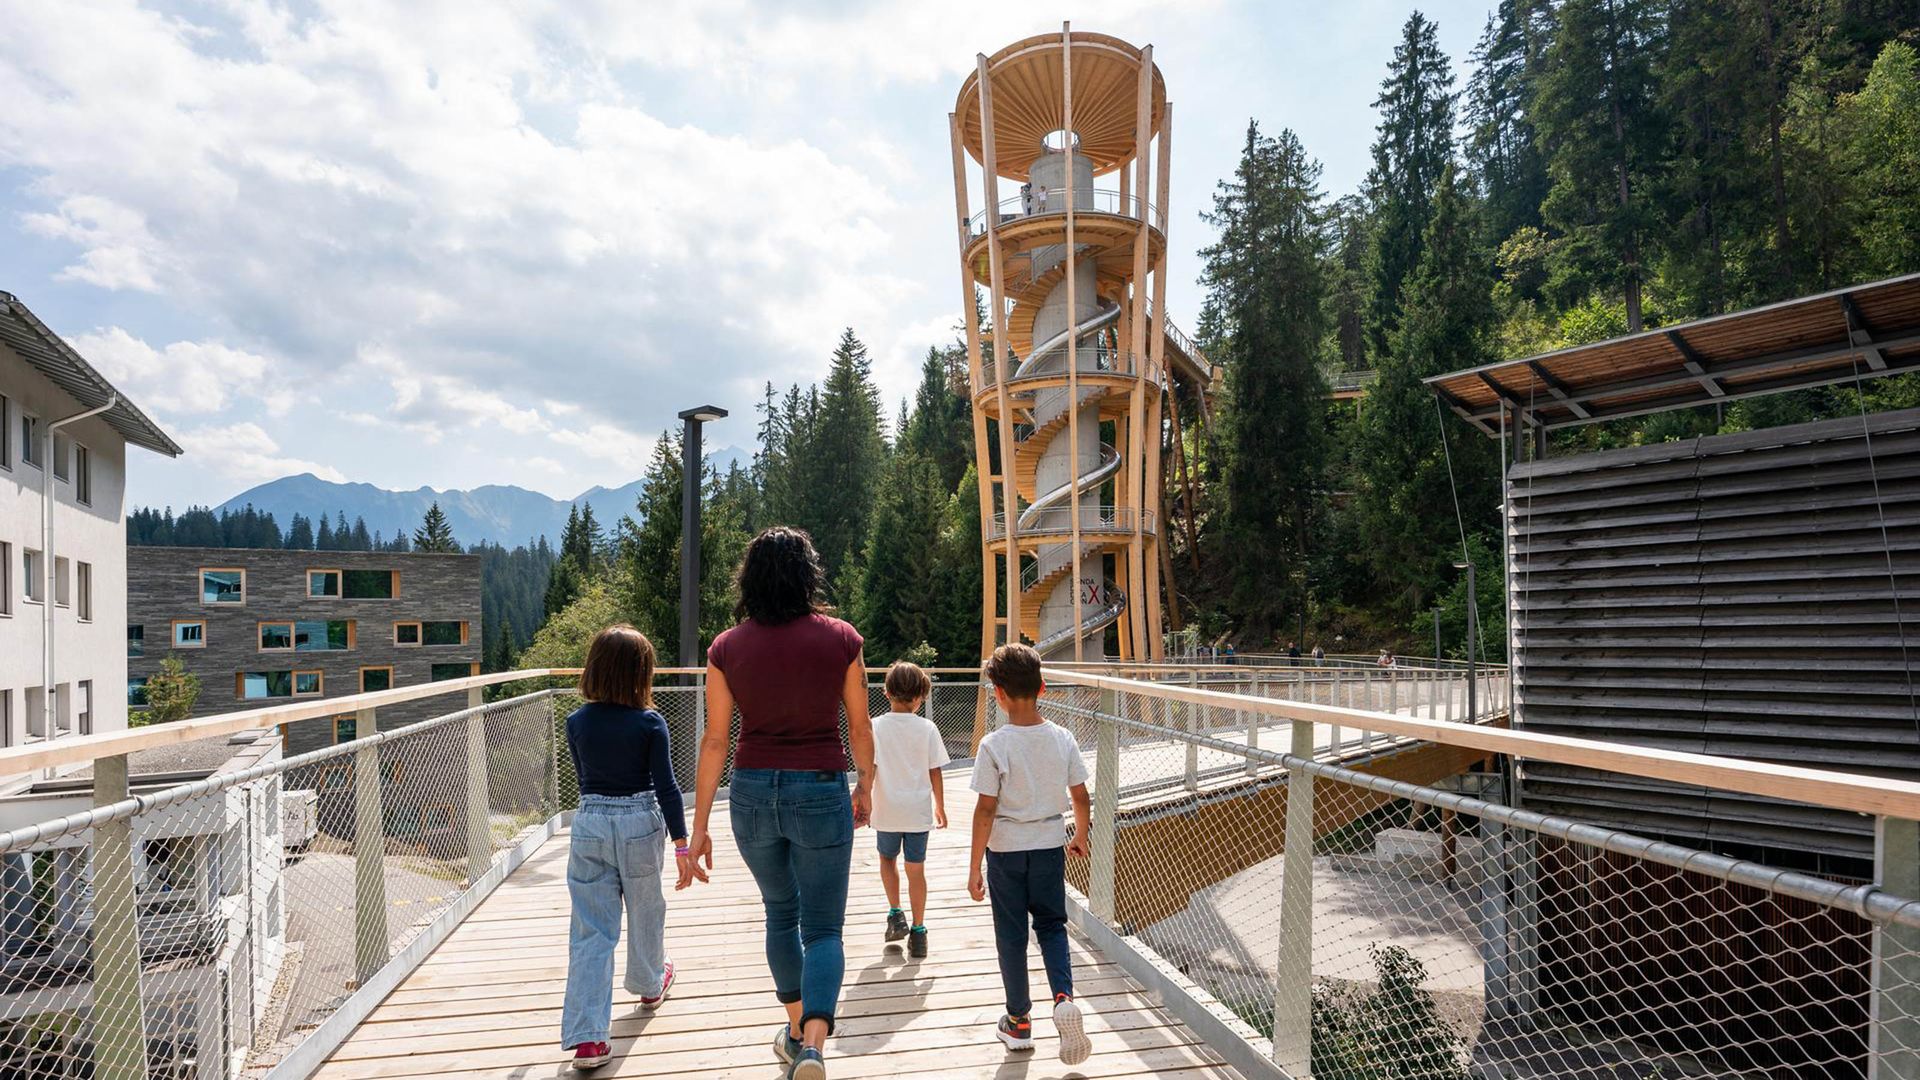 A family walks along the wooden walkway of the Laax treetop path towards a viewing tower.